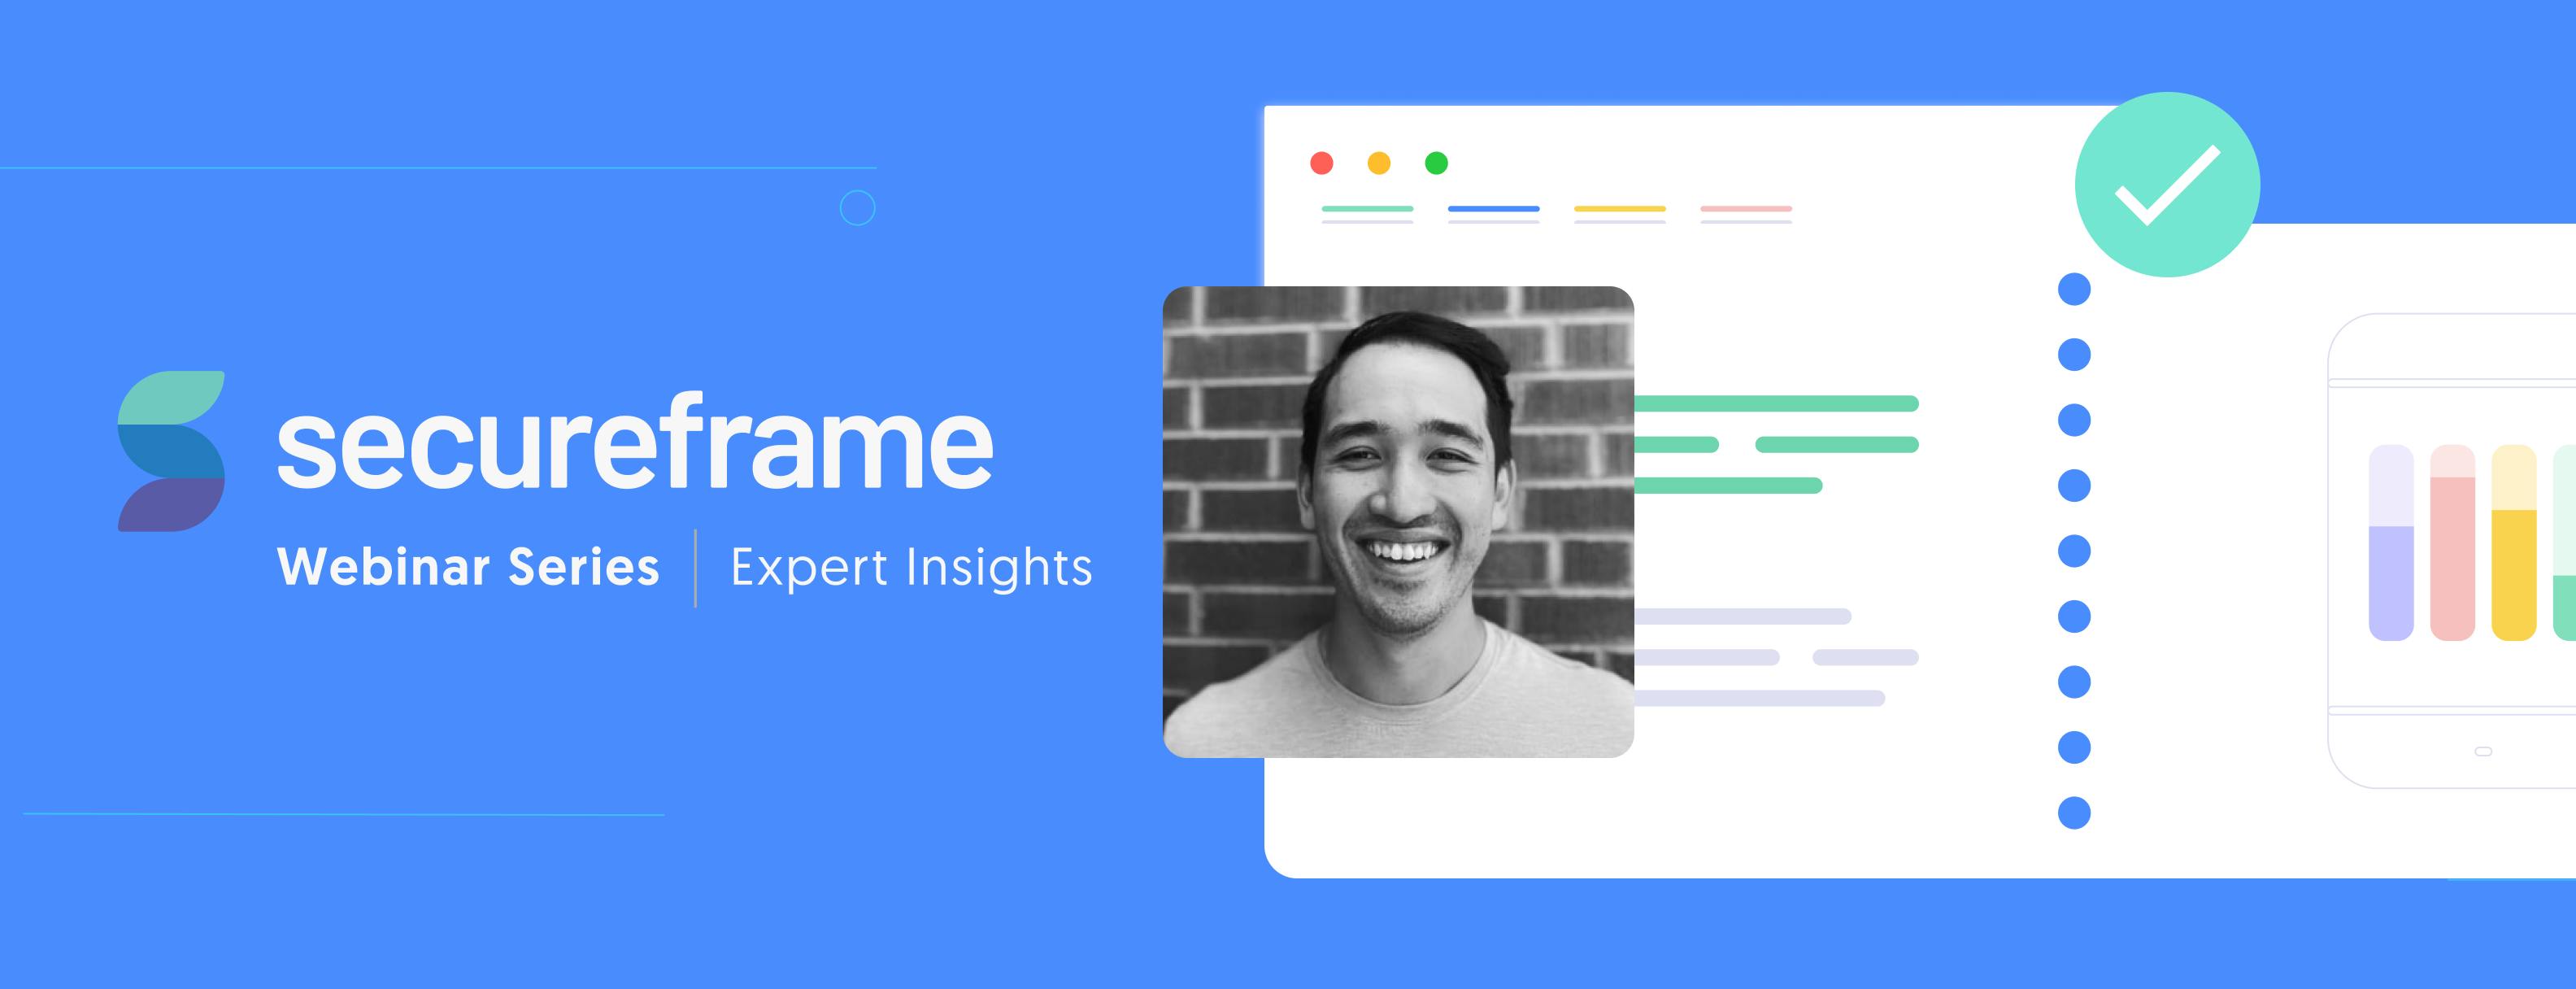 Expert Insights about Secureframe Questionnaires and Knowledge Base from Product Manager Nicky Hu